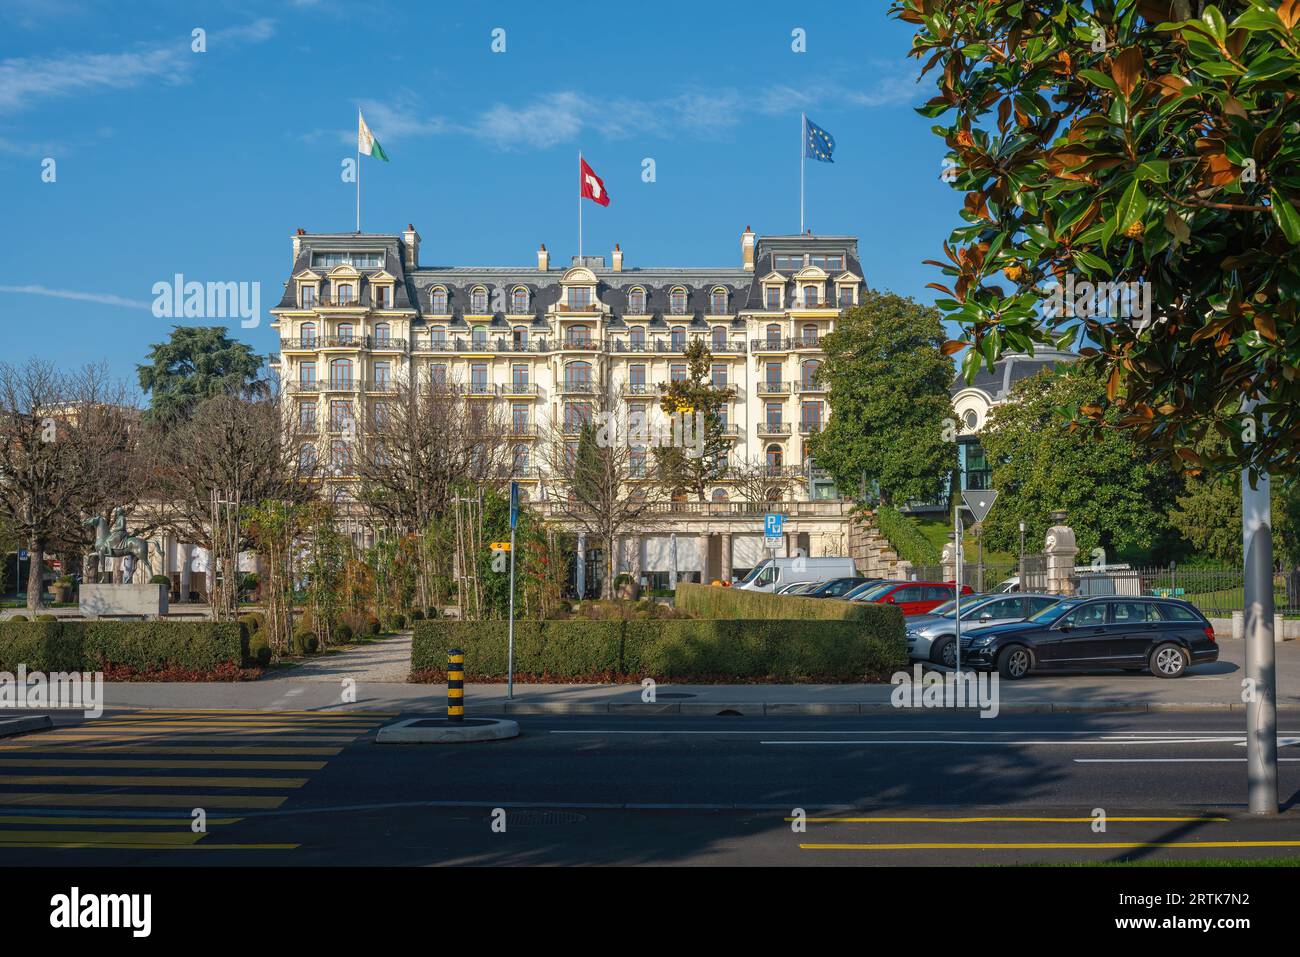 Beau-Rivage Palace Hotel at Ouchy Promenade - Lausanne, Schweiz Stockfoto